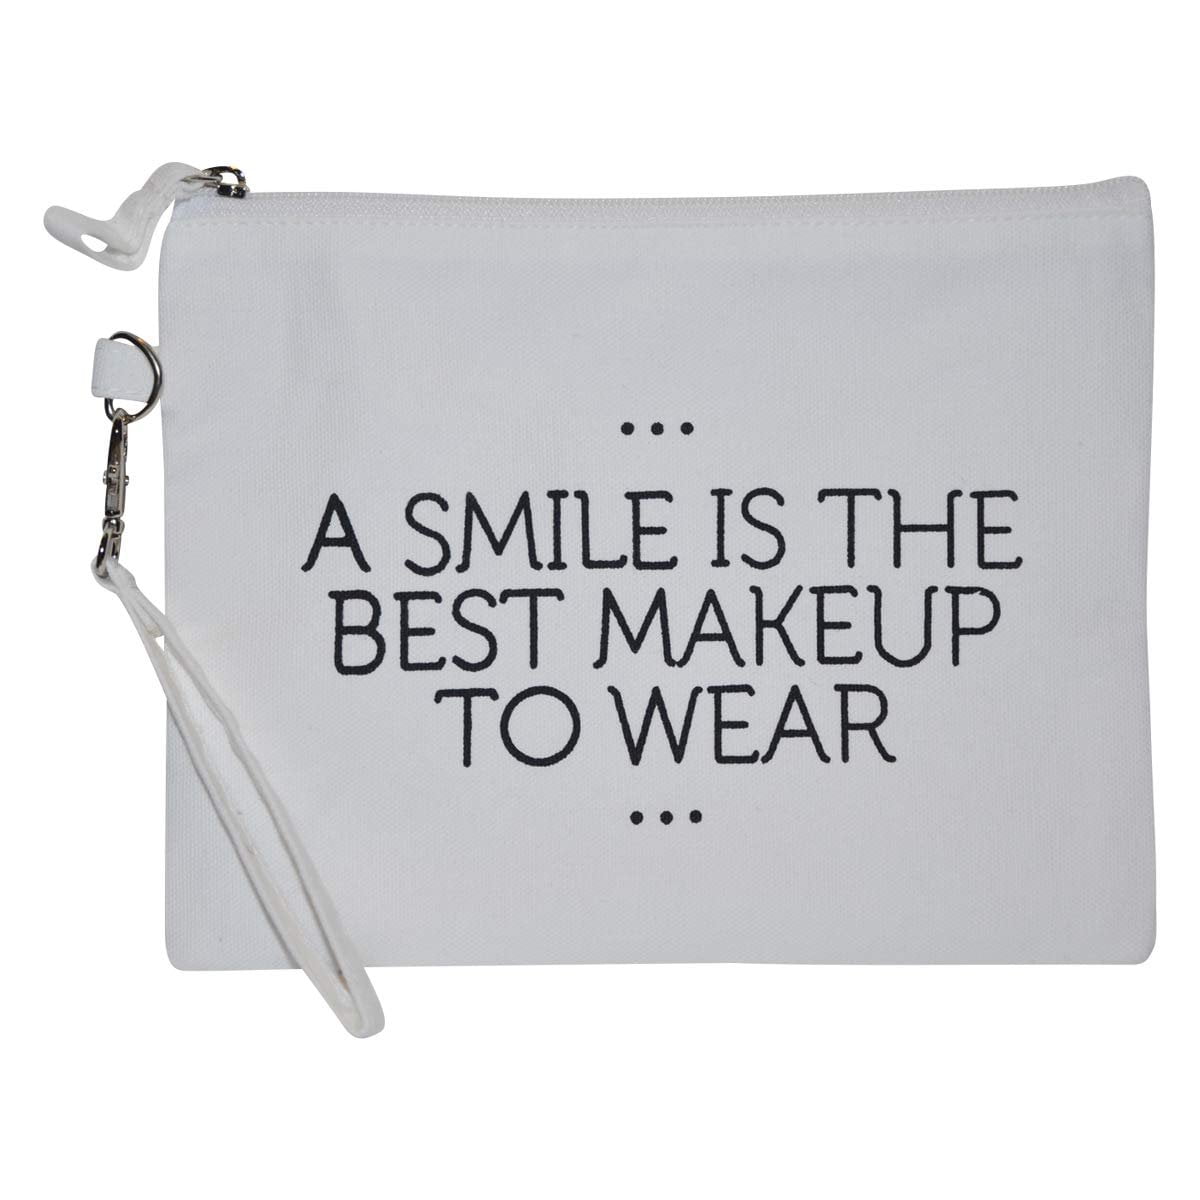 Cosmetic Bag with Sayings - Large Funny Makeup Bags - Womens Gift Makeup  Bags with Quotes - Cute Storage Bag for Travel A Smile is the Best Makeup  to Wear 